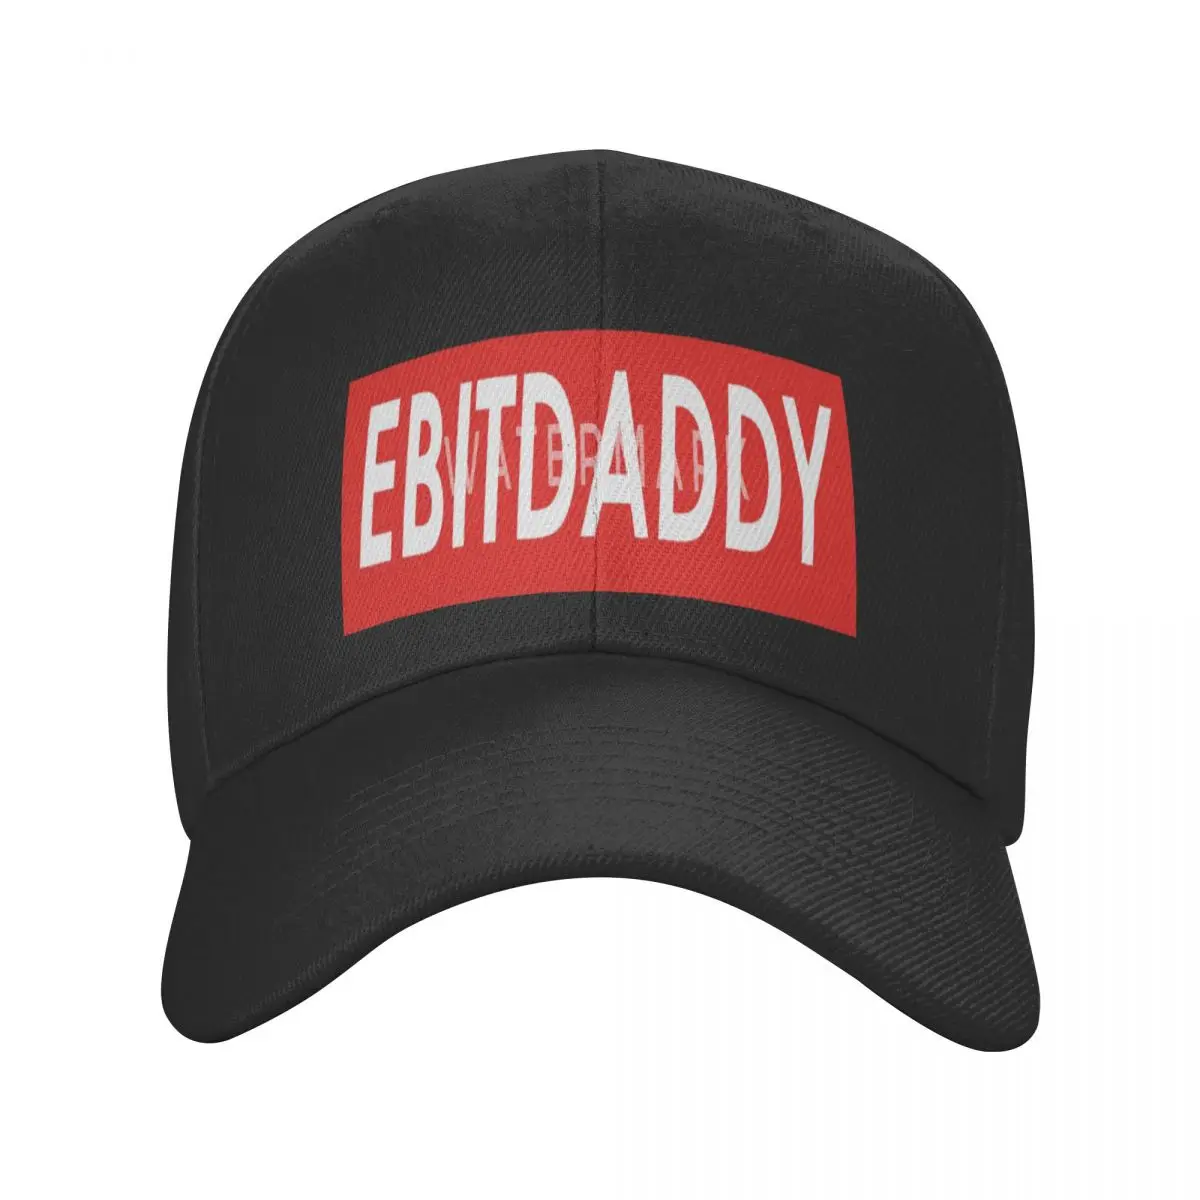 

Ebitdaddy Ebitda Finance Casquette, Polyester Cap Personalized Moisture Wicking Travel Nice Gift